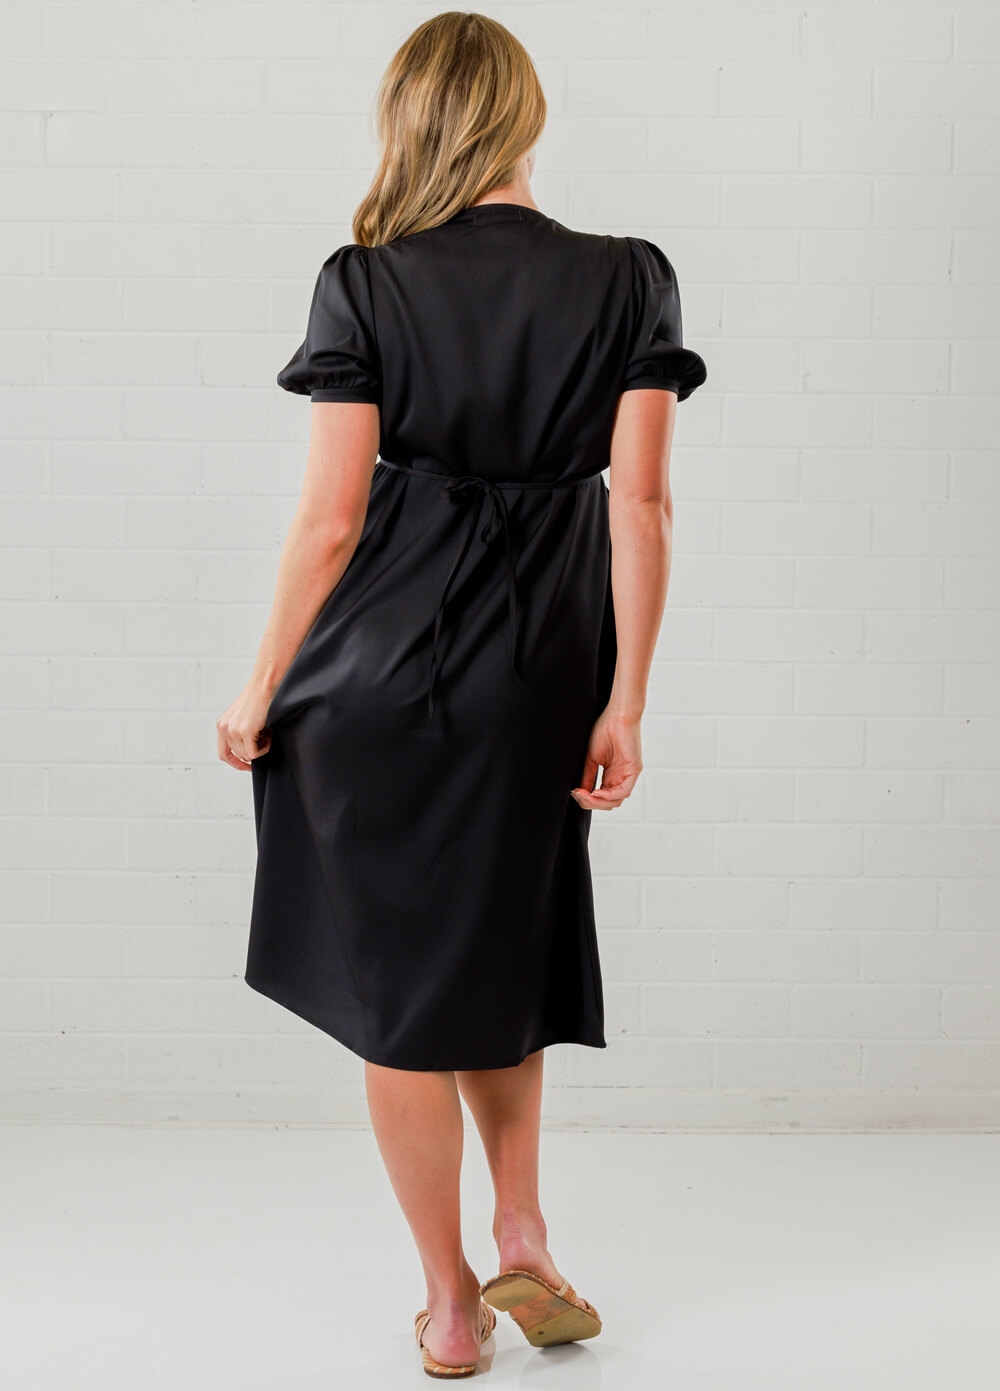 Lait & Co - Anna-Elea Maternity Cocktail Party Dress in Black